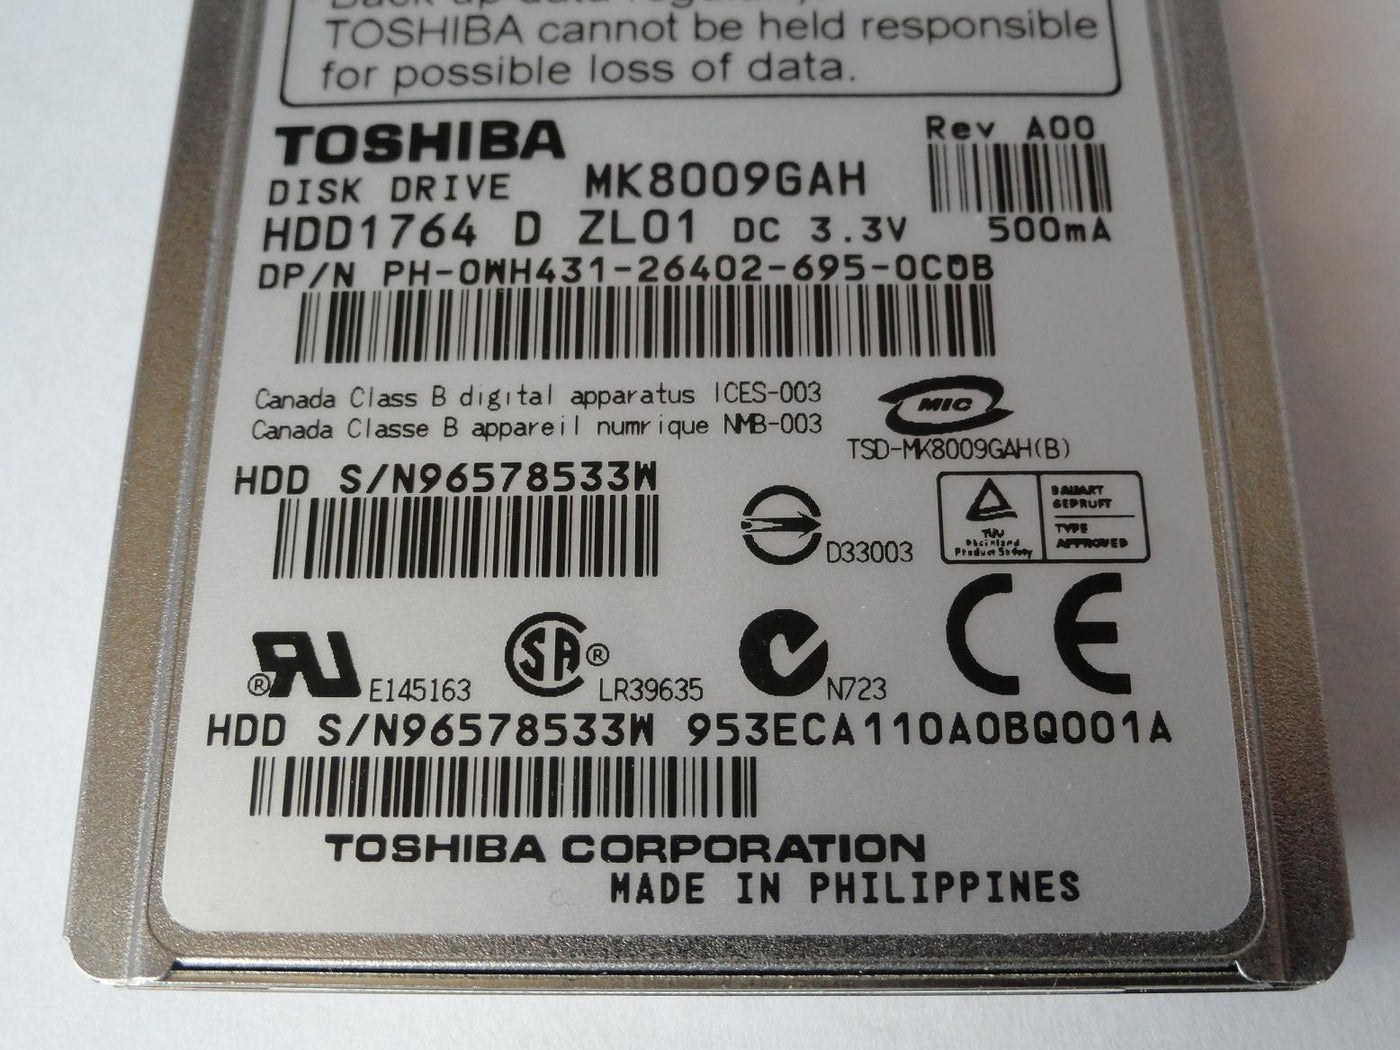 PR23017_HDD1764_Toshiba Dell 80Gb ZIF 4200rpm 1.8in HDD - Image3